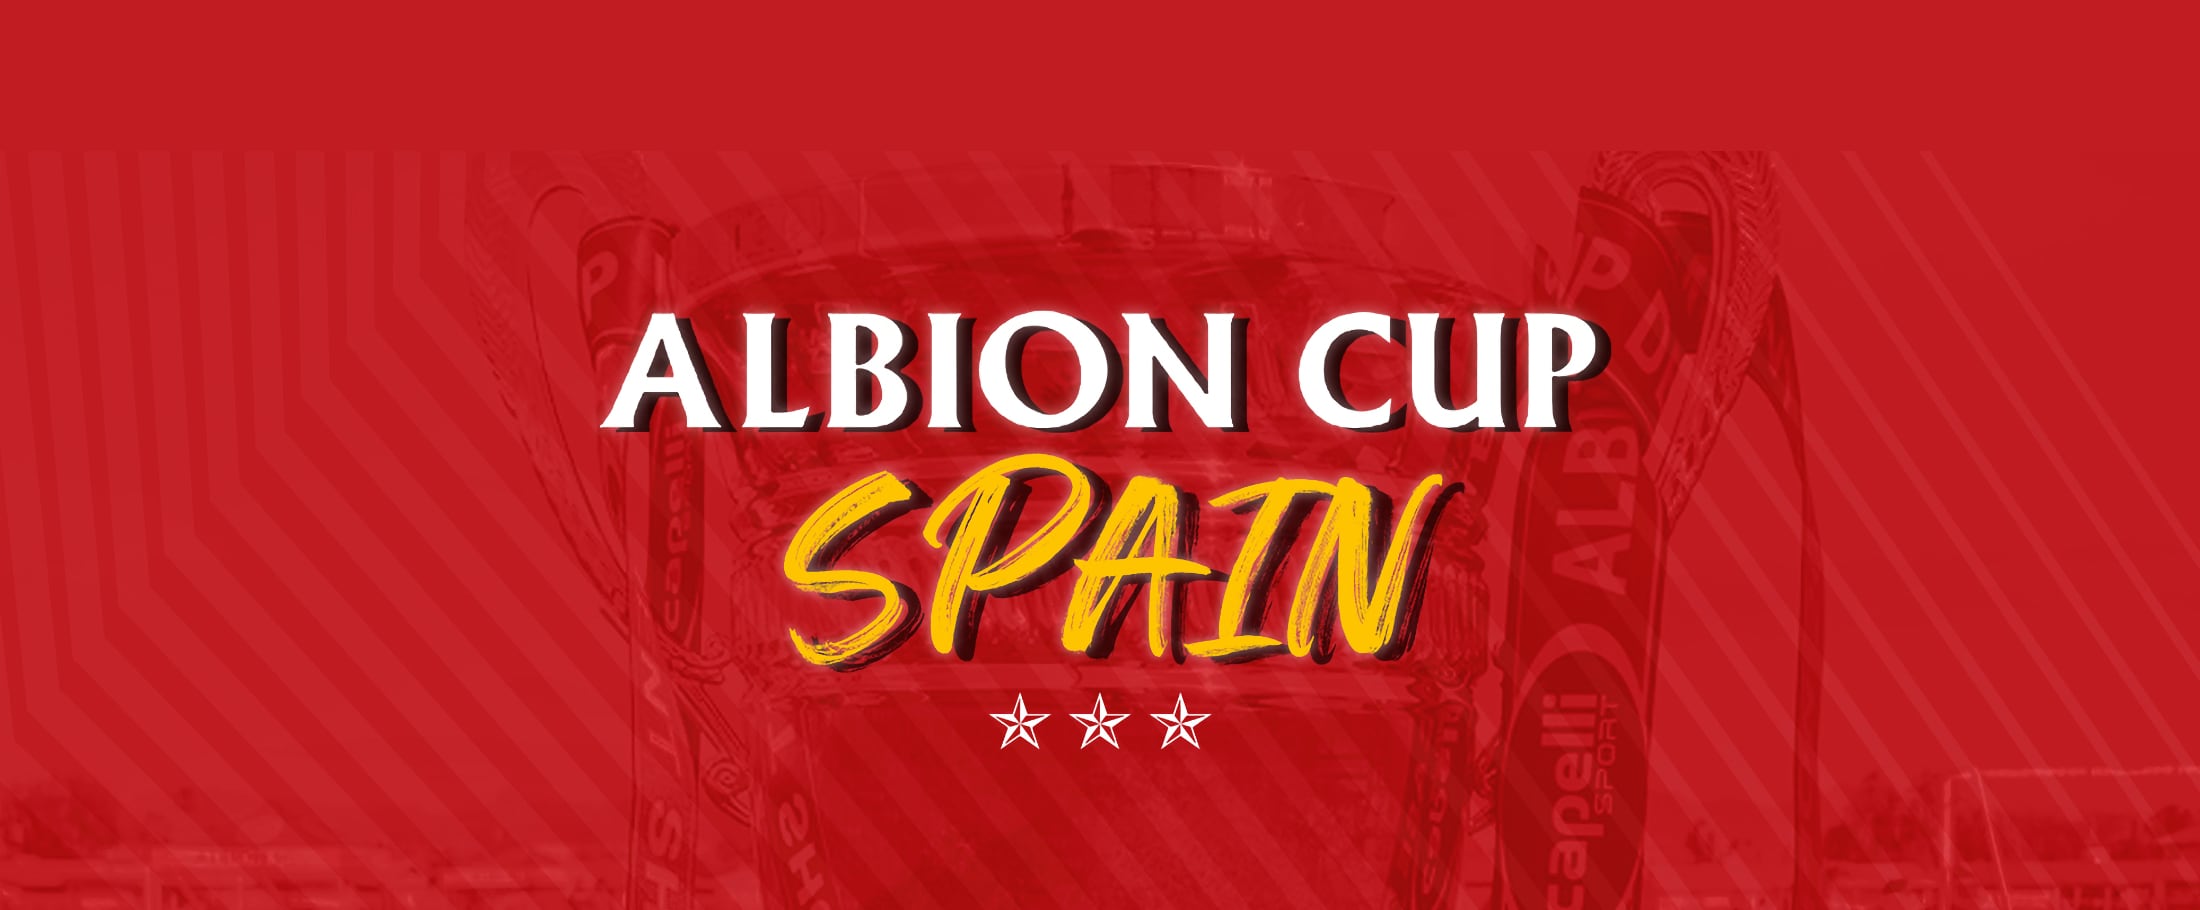 ALBION CUP Spain European Soccer Solutions